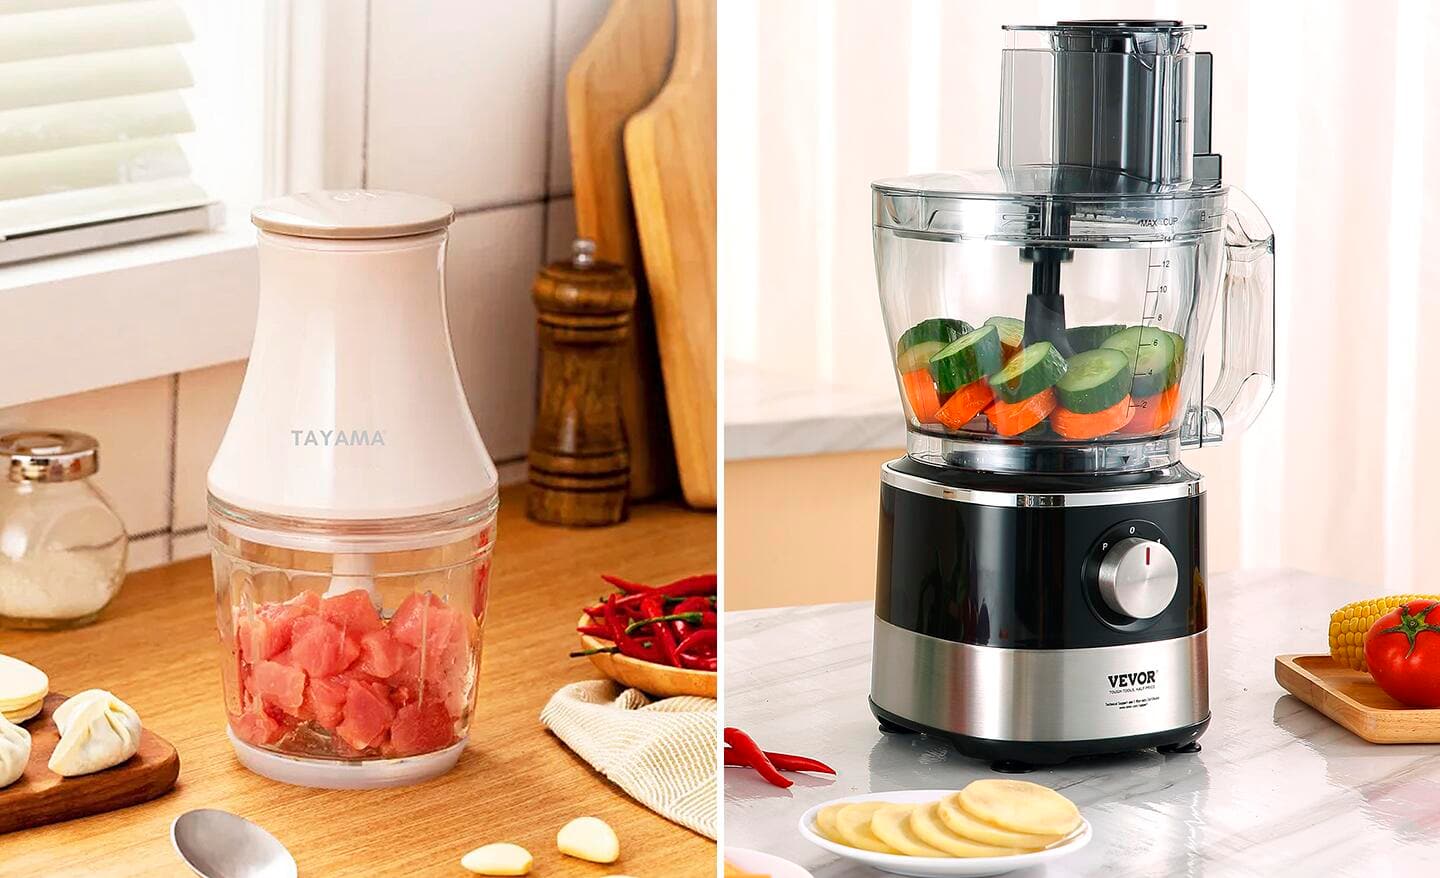 Two styles of food processors on kitchen counters